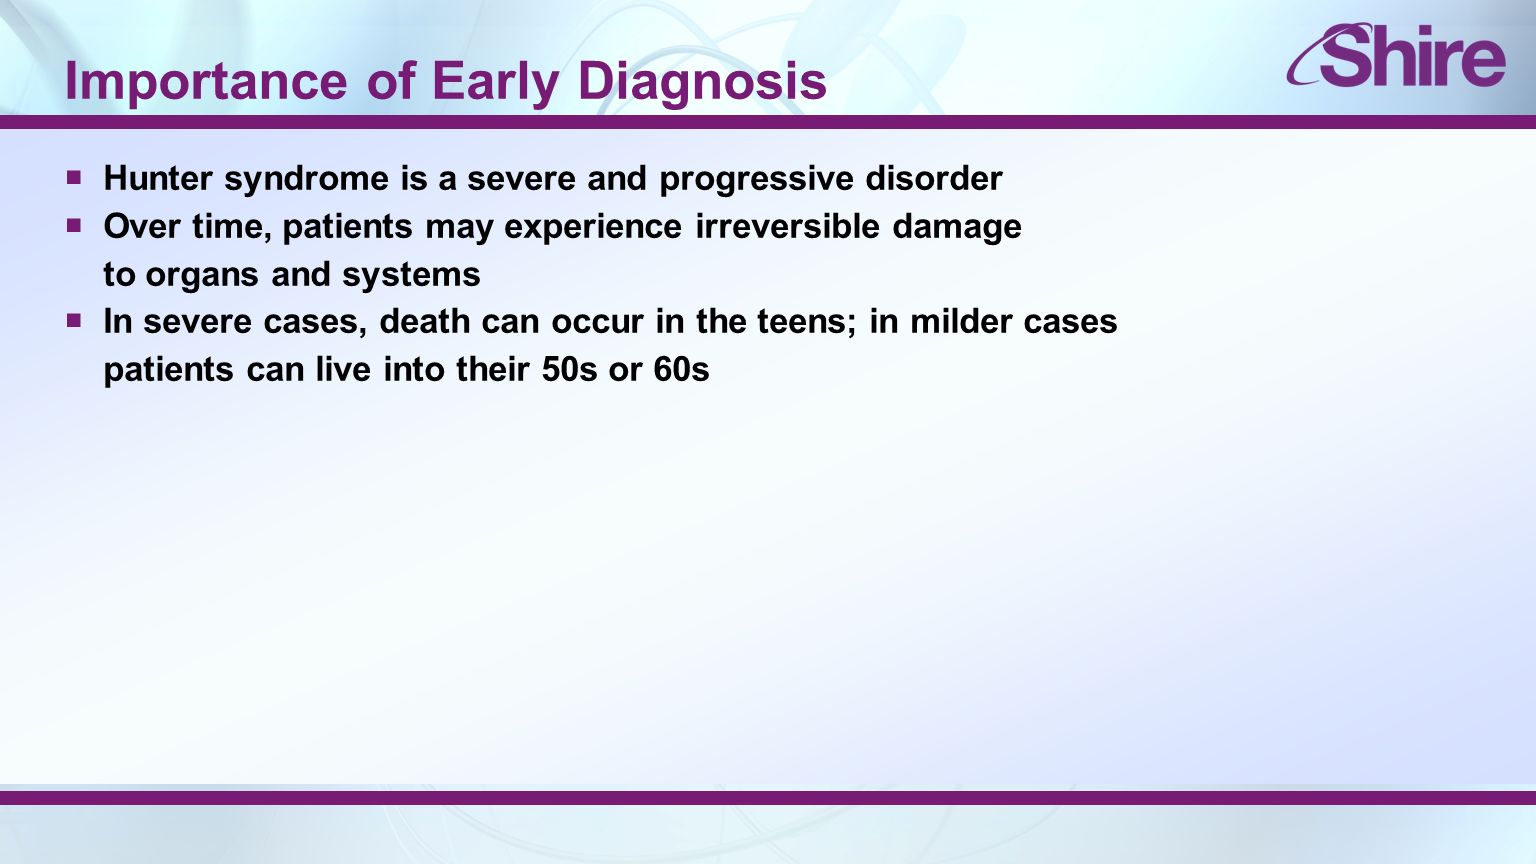 Importance of Early Diagnosis  Hunter syndrome is a severe and progressive disorder  Over time, patients may experience irreversible damage to organs and systems  In severe cases, death can occur in the teens; in milder cases patients can live into their 50s or 60s